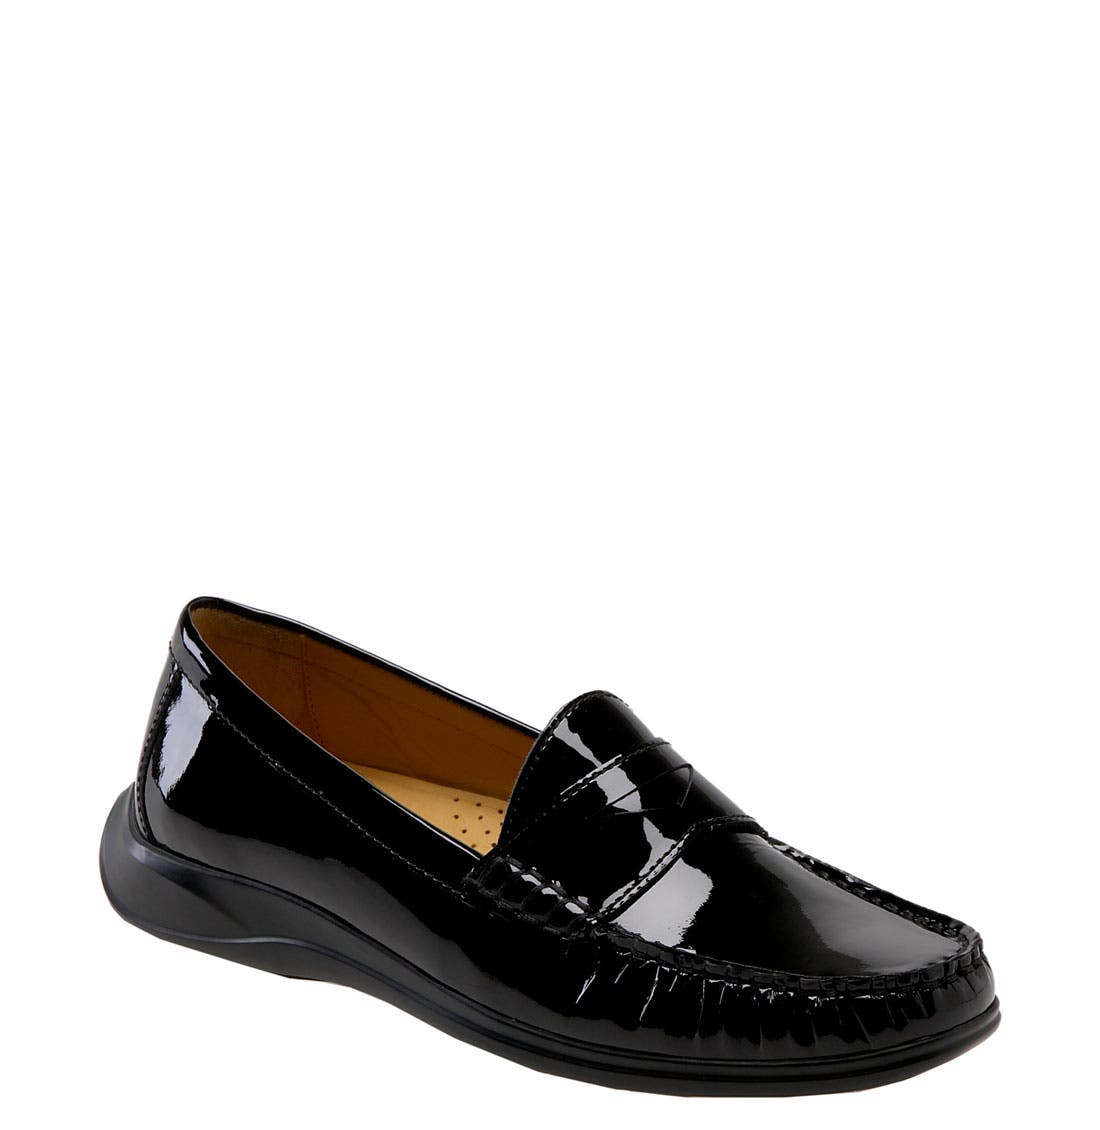 Cole Haan 'Air Erika' Penny Loafer 